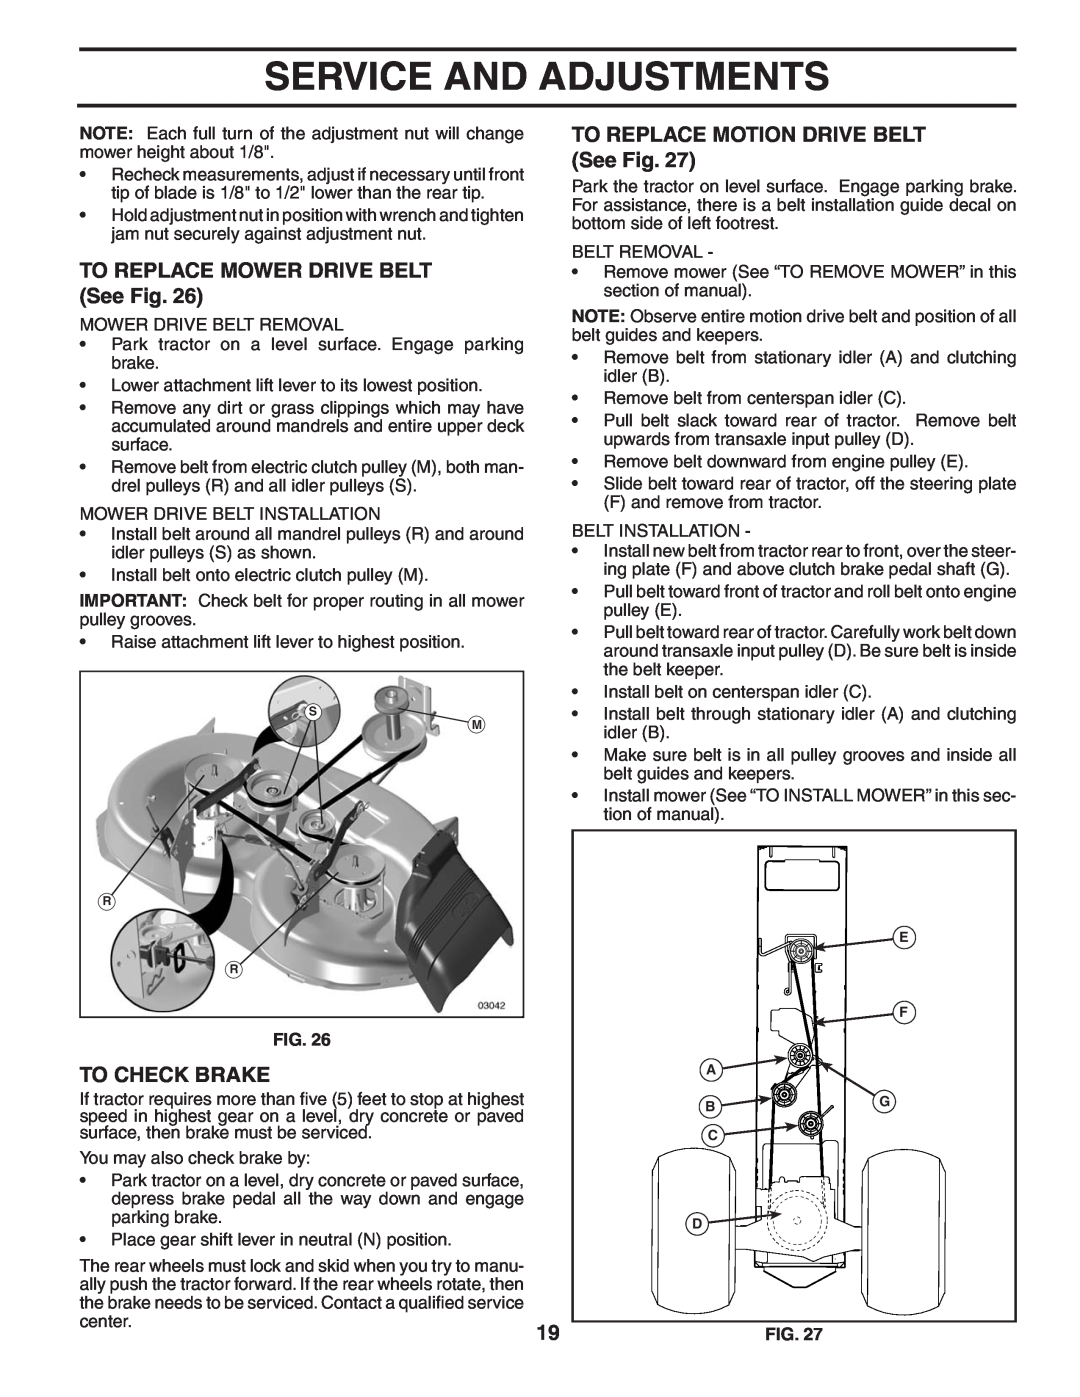 Husqvarna YT1942T owner manual TO REPLACE MOWER DRIVE BELT See Fig, To Check Brake, TO REPLACE MOTION DRIVE BELT See Fig 